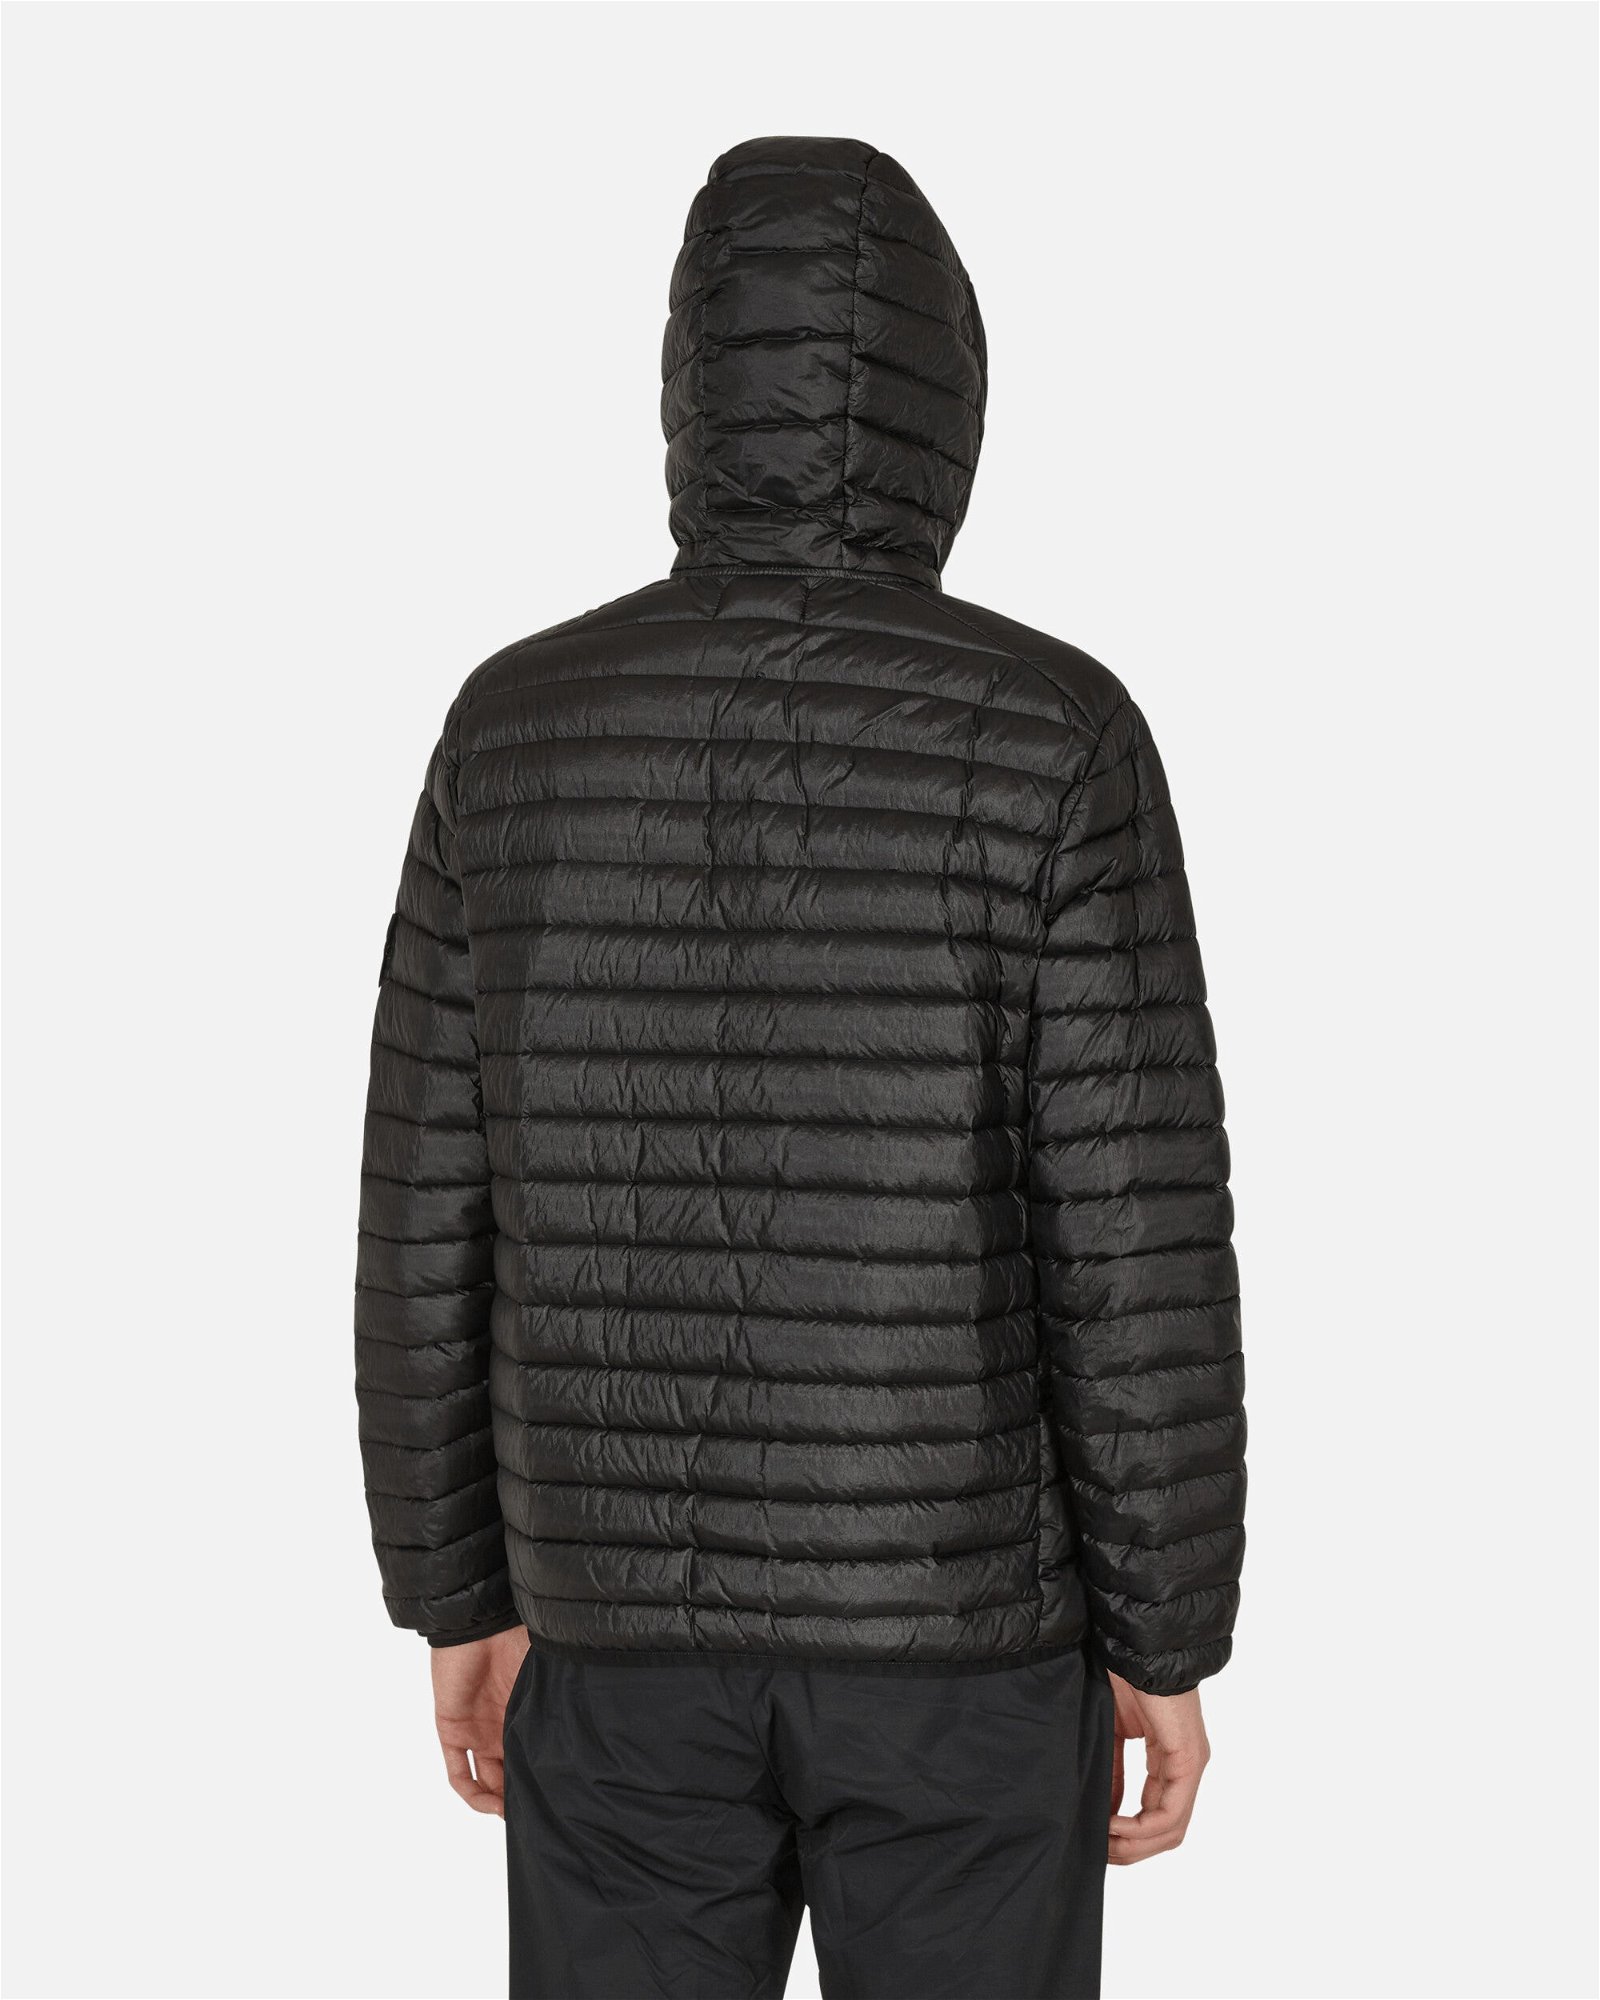 Packable Loom Woven Chambers R-Nylon Down-TC Jacket